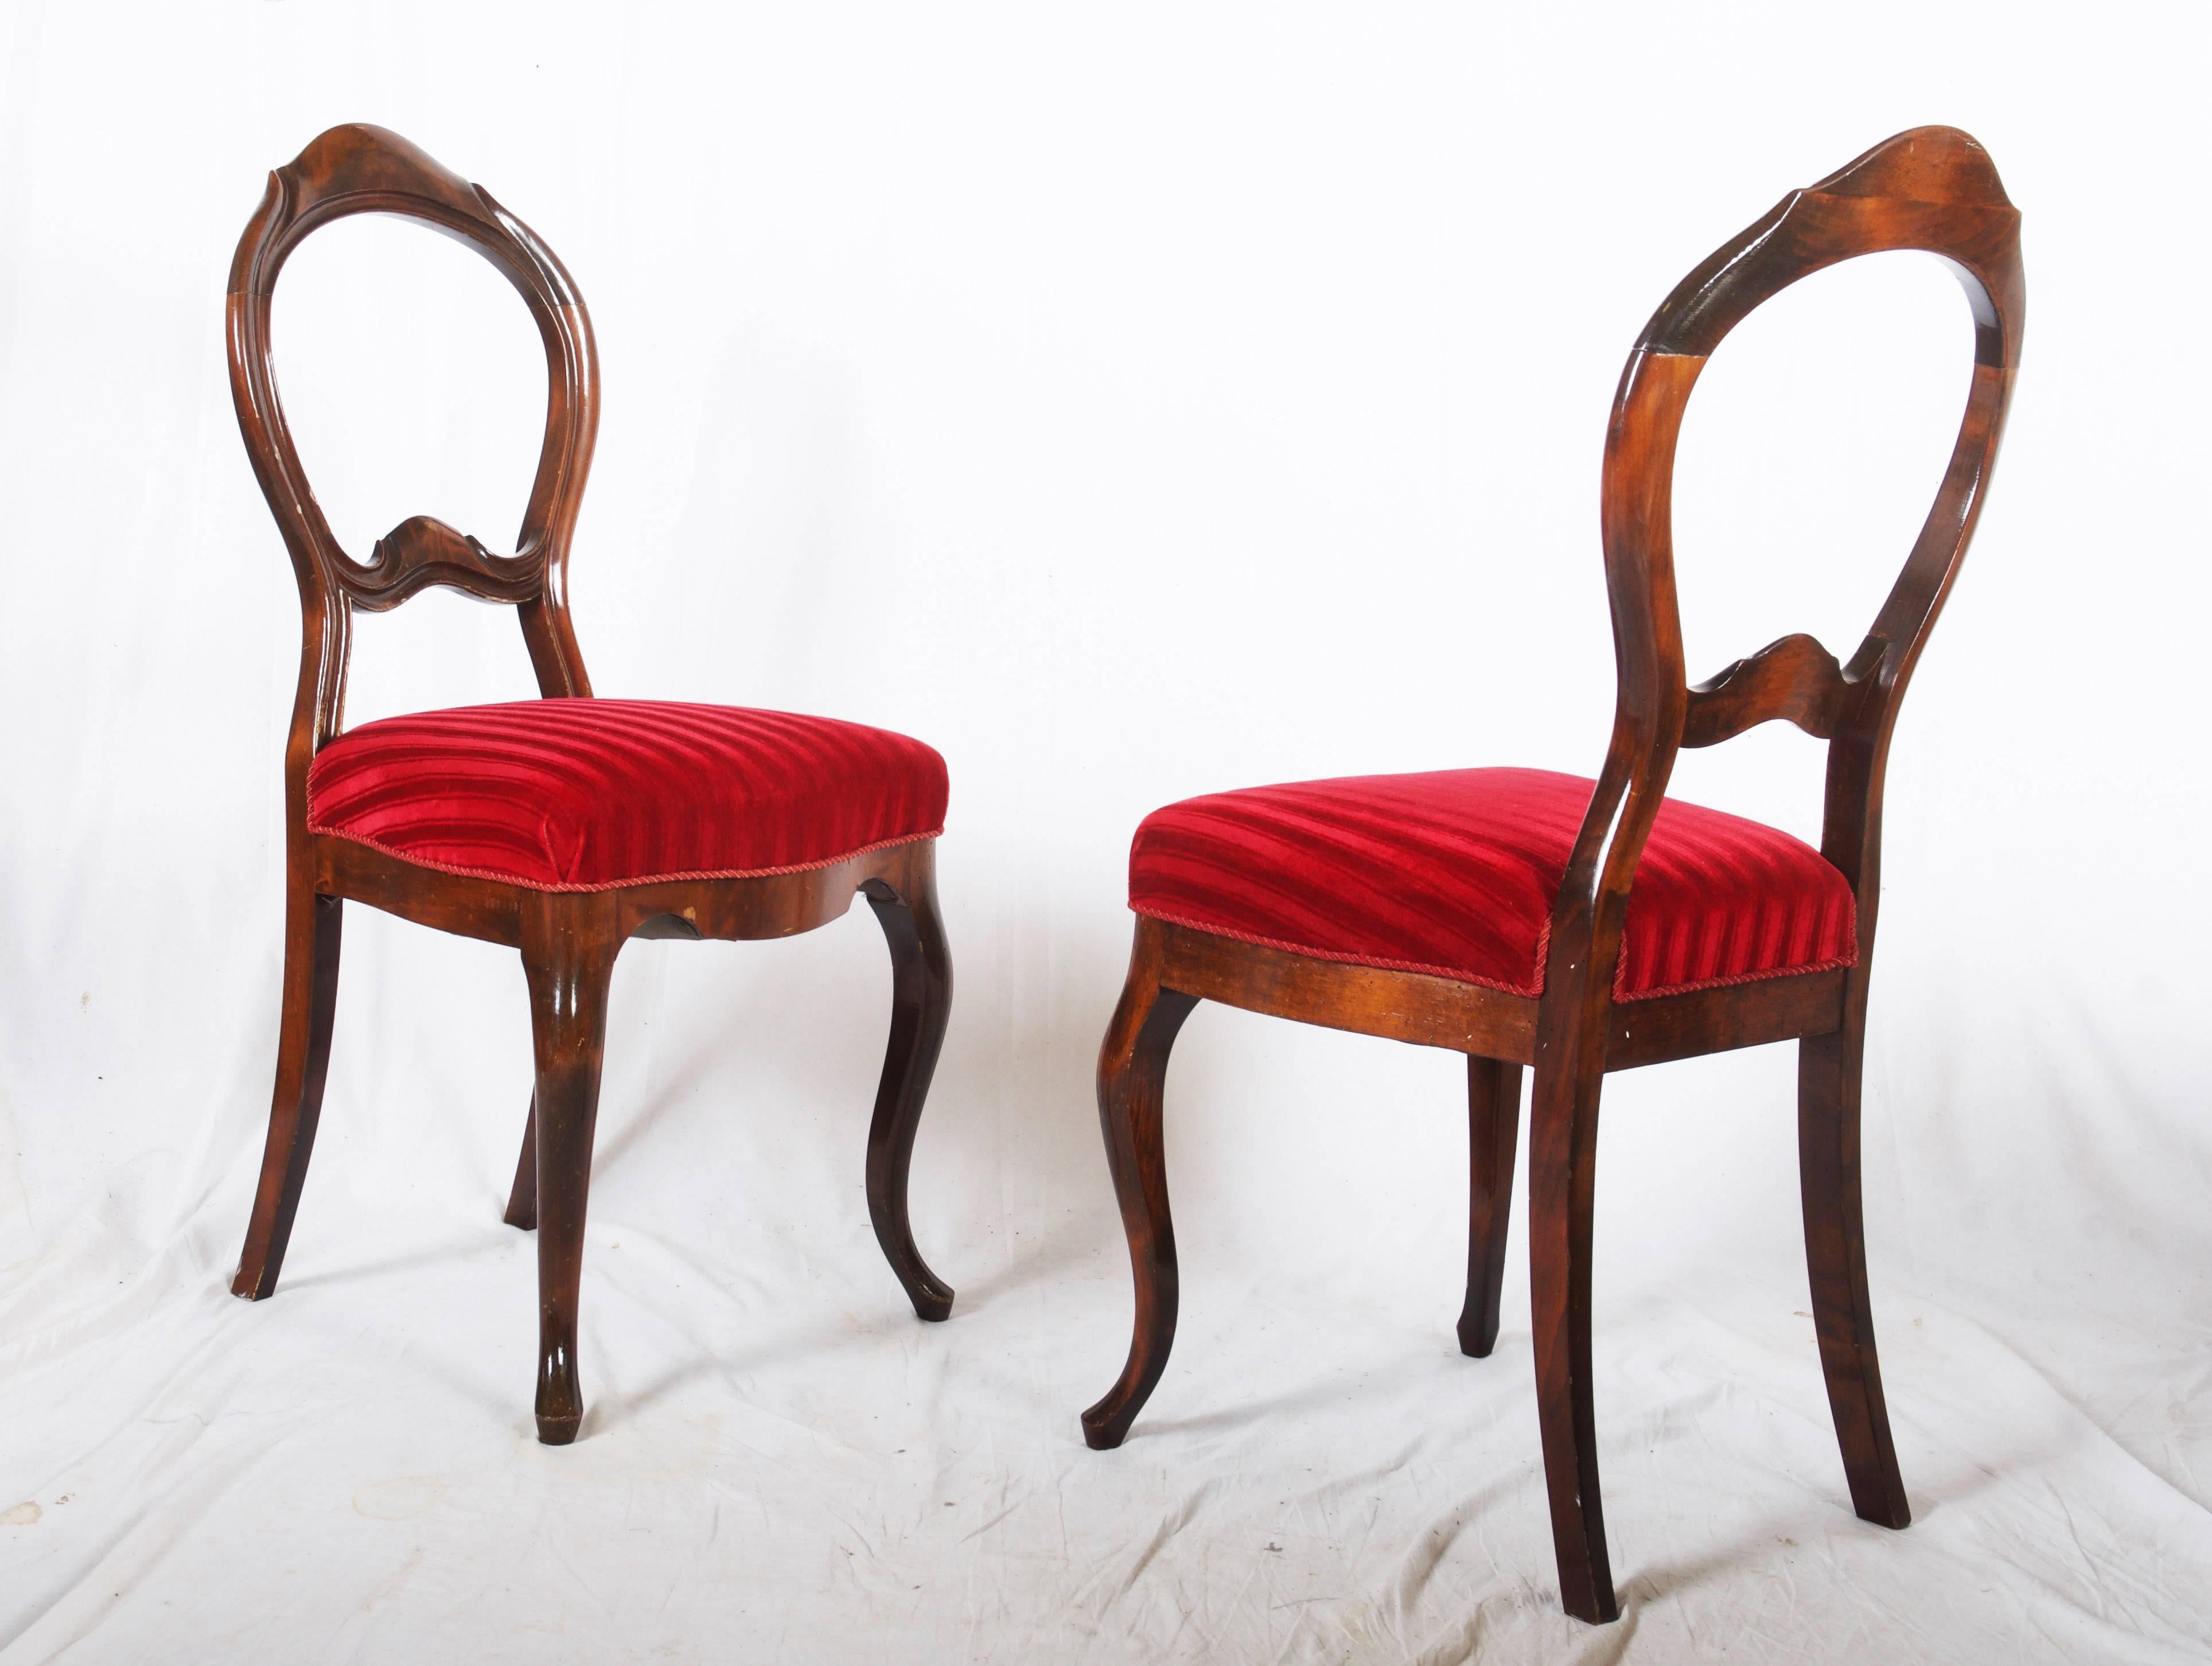 Mid-19th Century Pair of Mahogany Chairs Form 1850s For Sale